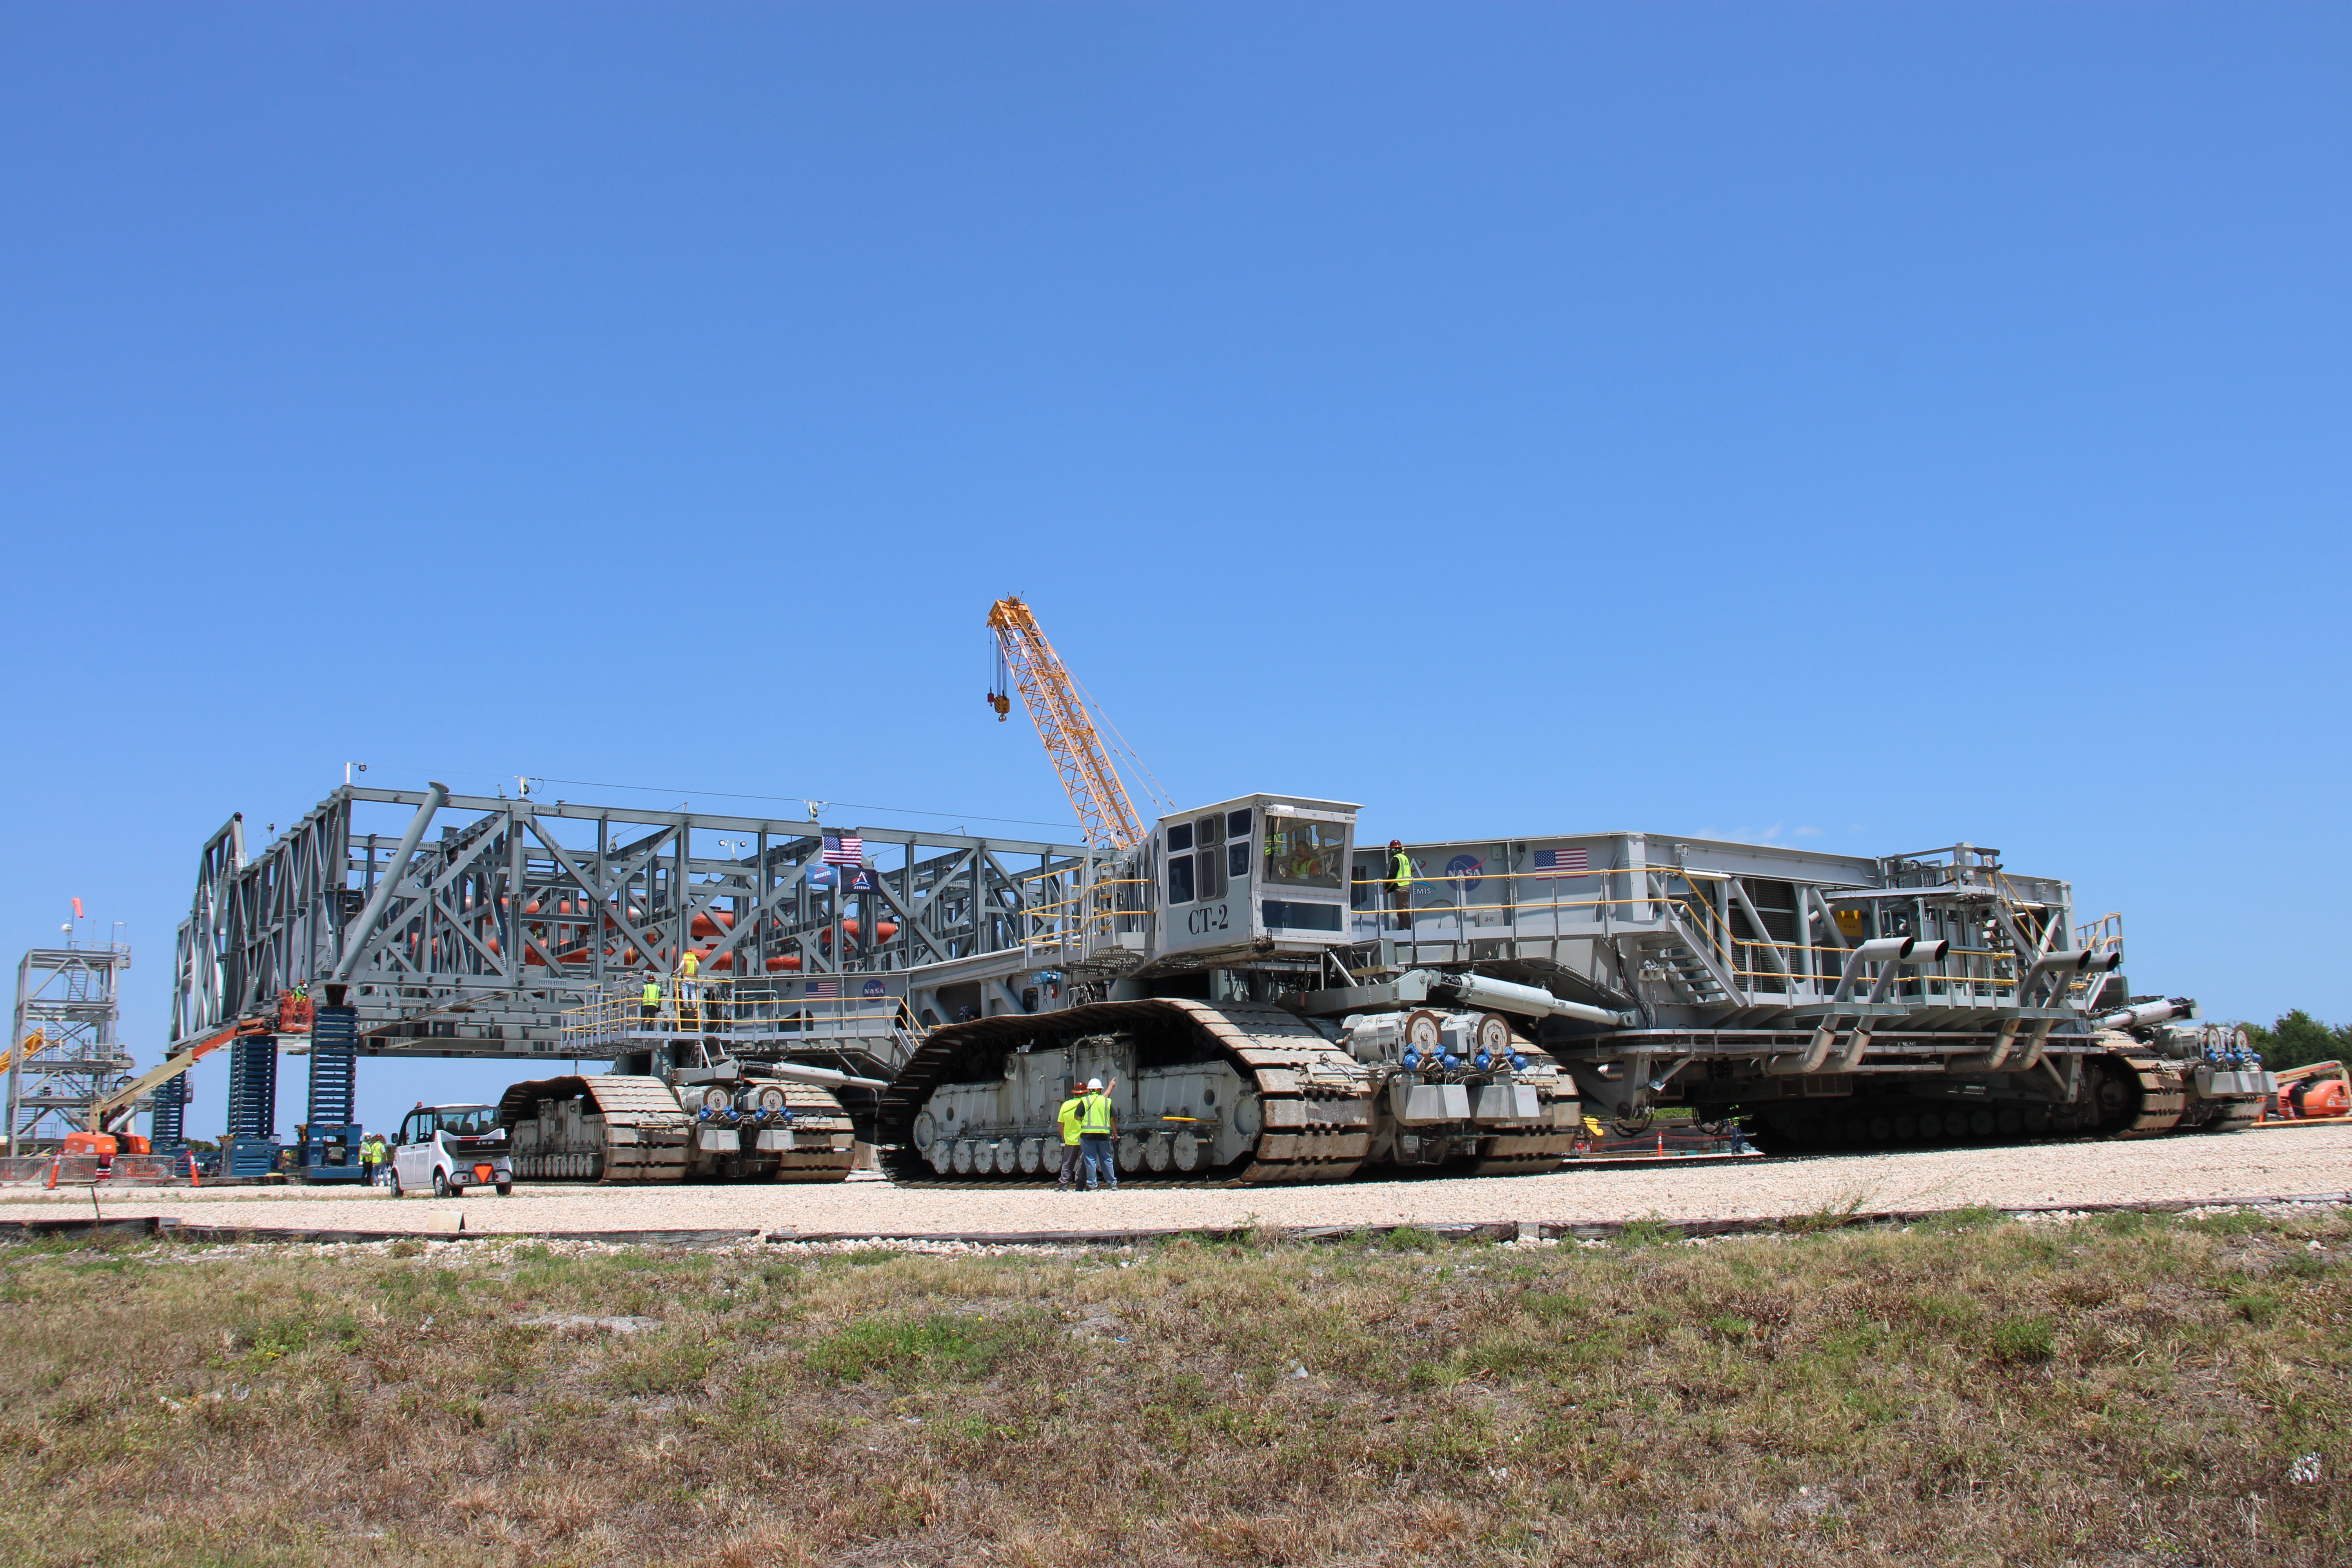 NASA’s crawler transporter approaches the Mobile Launcher 2 base during Jack and Set. 